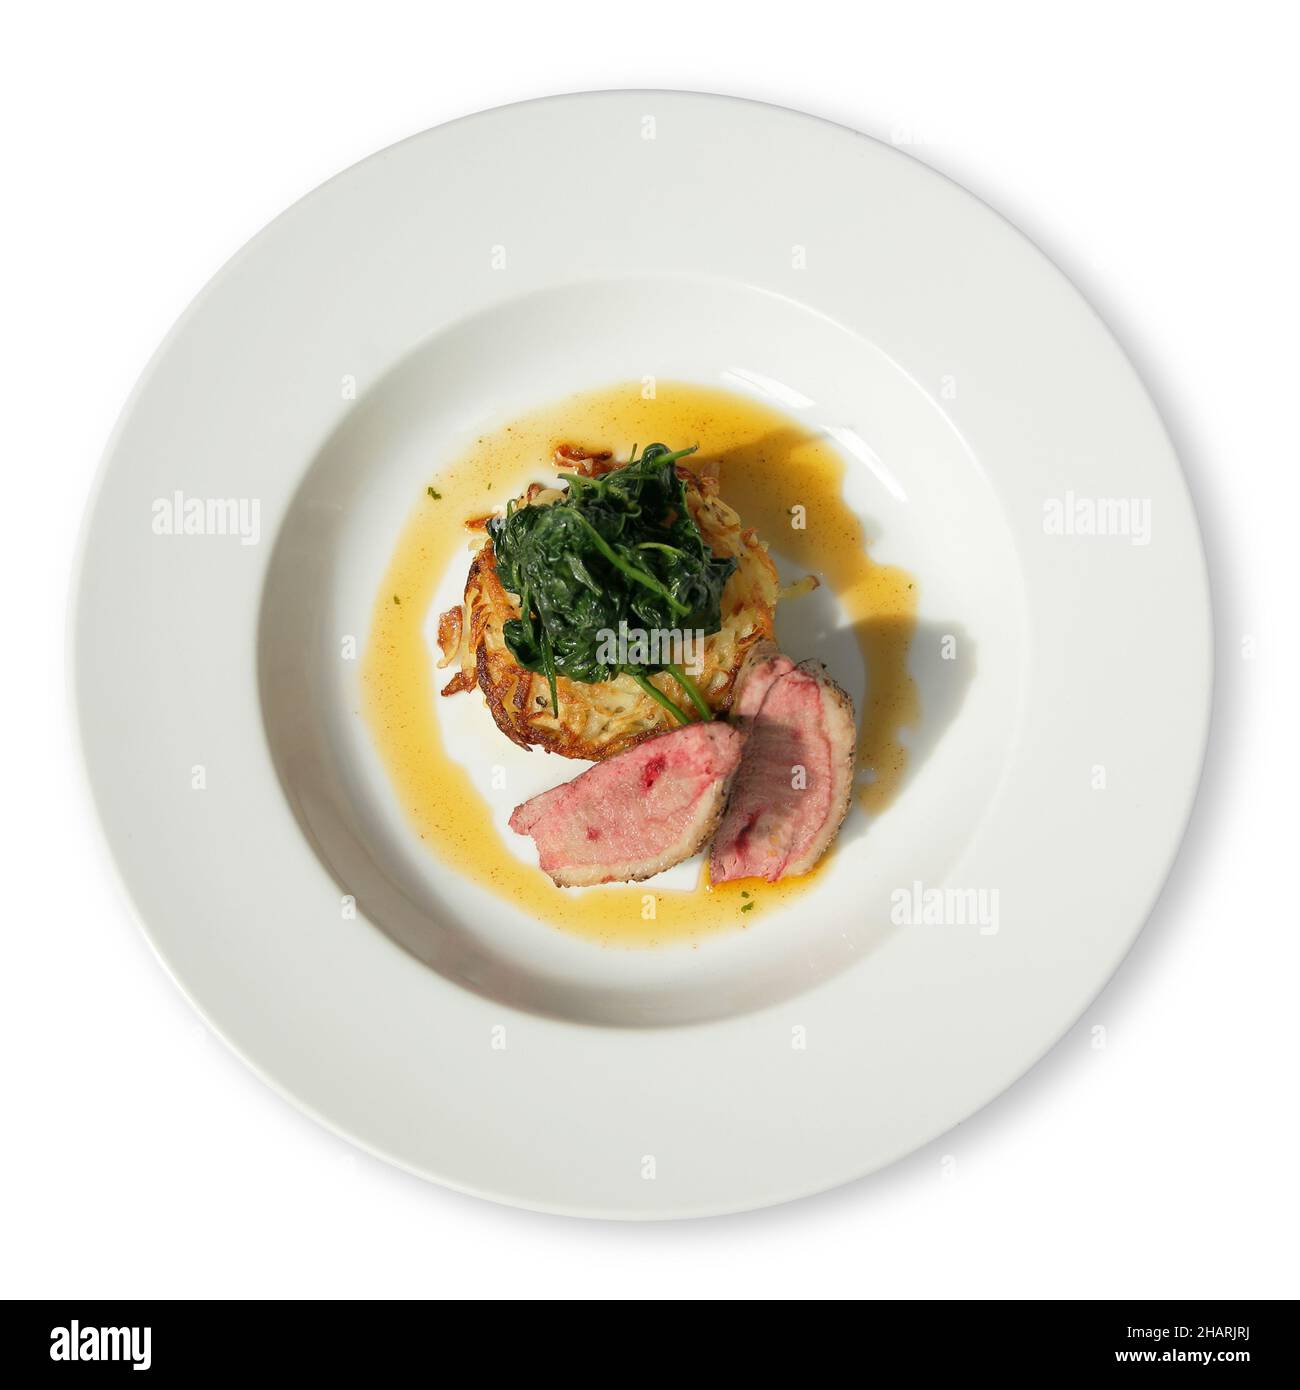 White diner plate with lamb loin spinach and potato rosti Stock Photo